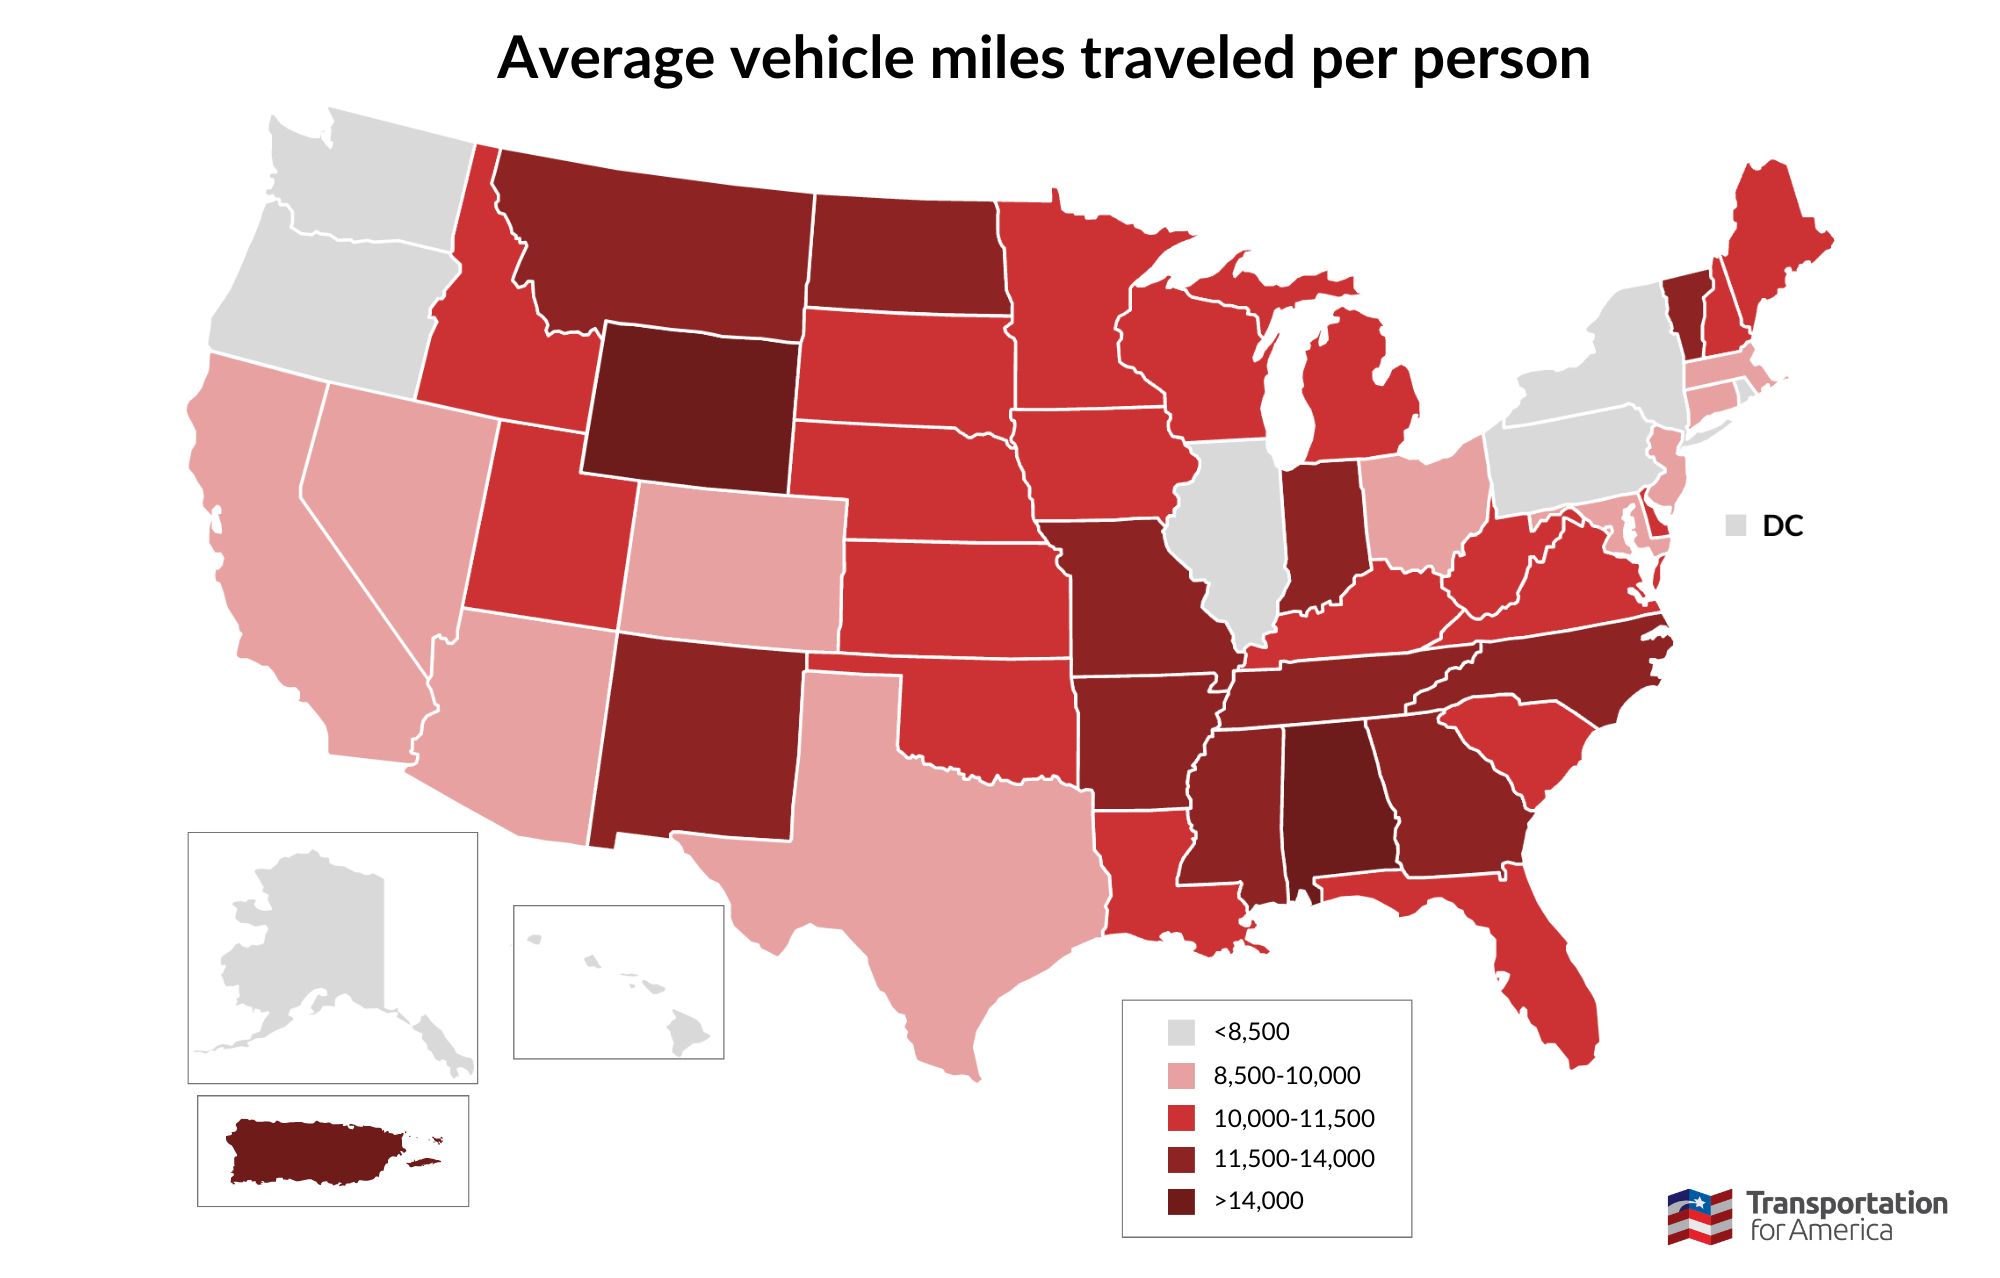 Map of vehicle miles traveled by state. Key findings in the paragraph above.